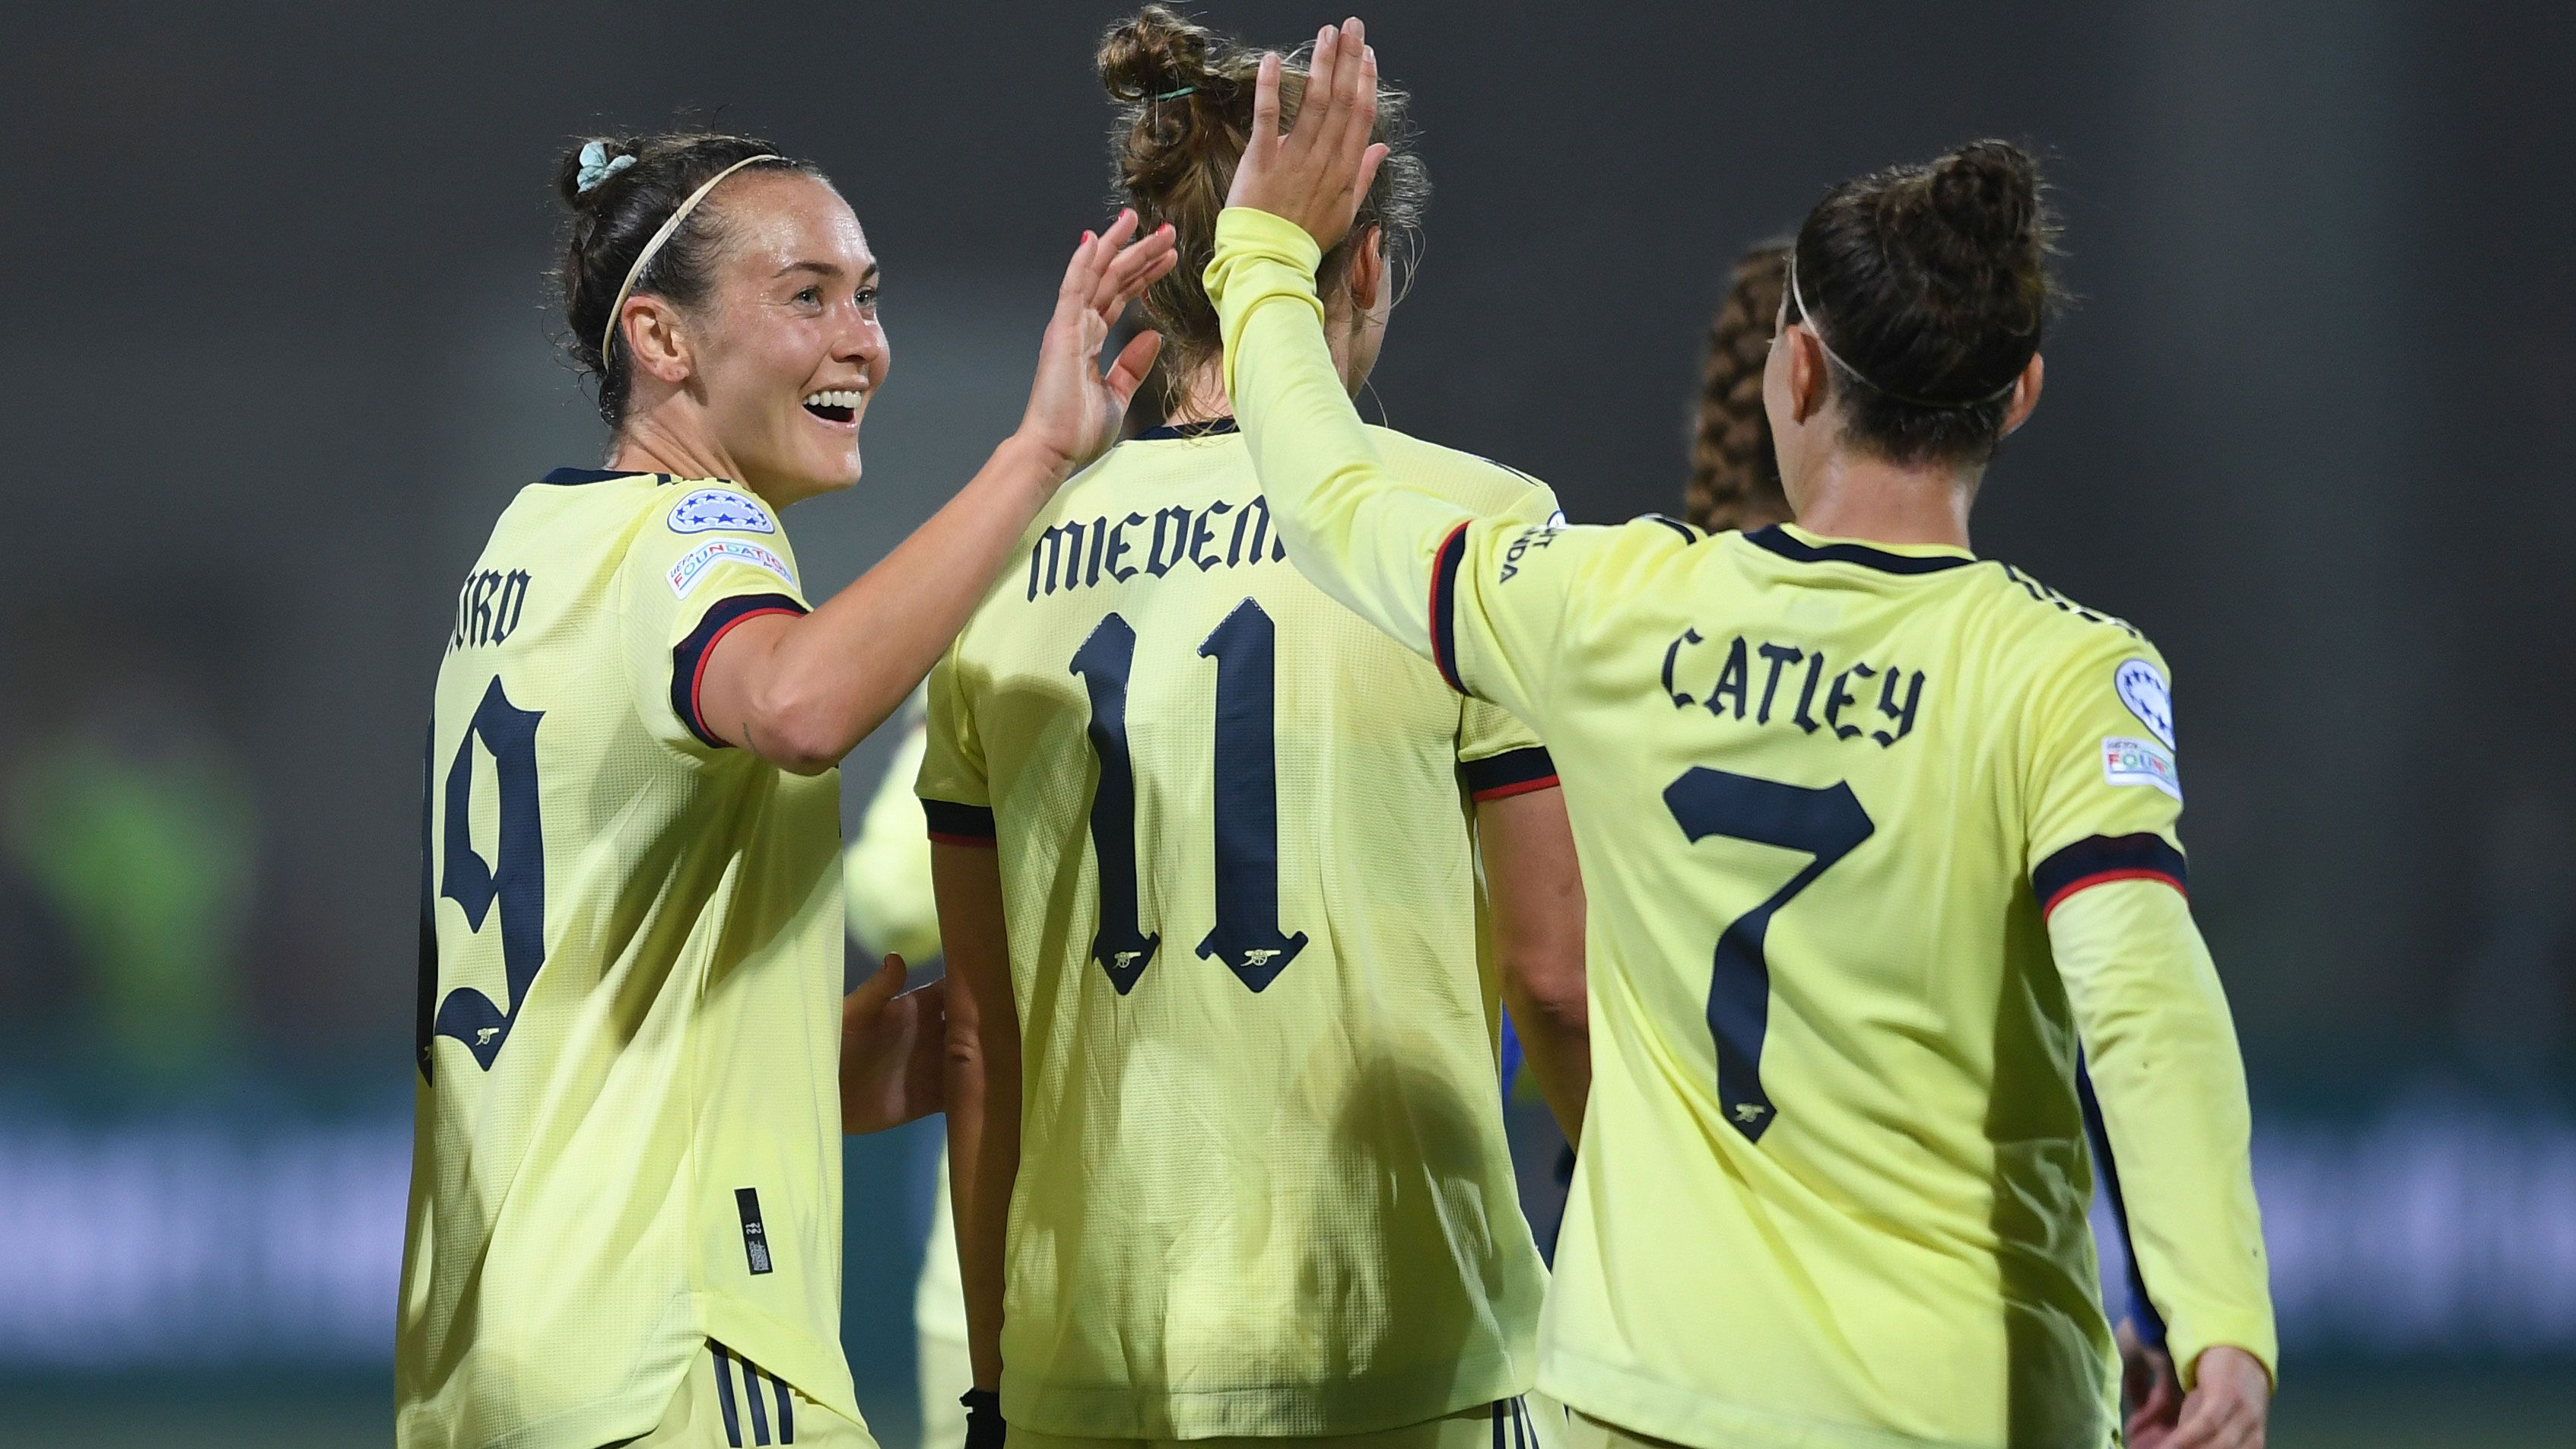 Aussies Caitlin Foord and Steph Catley celebrate a goal during Arsenal&#x27;s UEFA Women&#x27;s Champions League group C match against HB Koge.